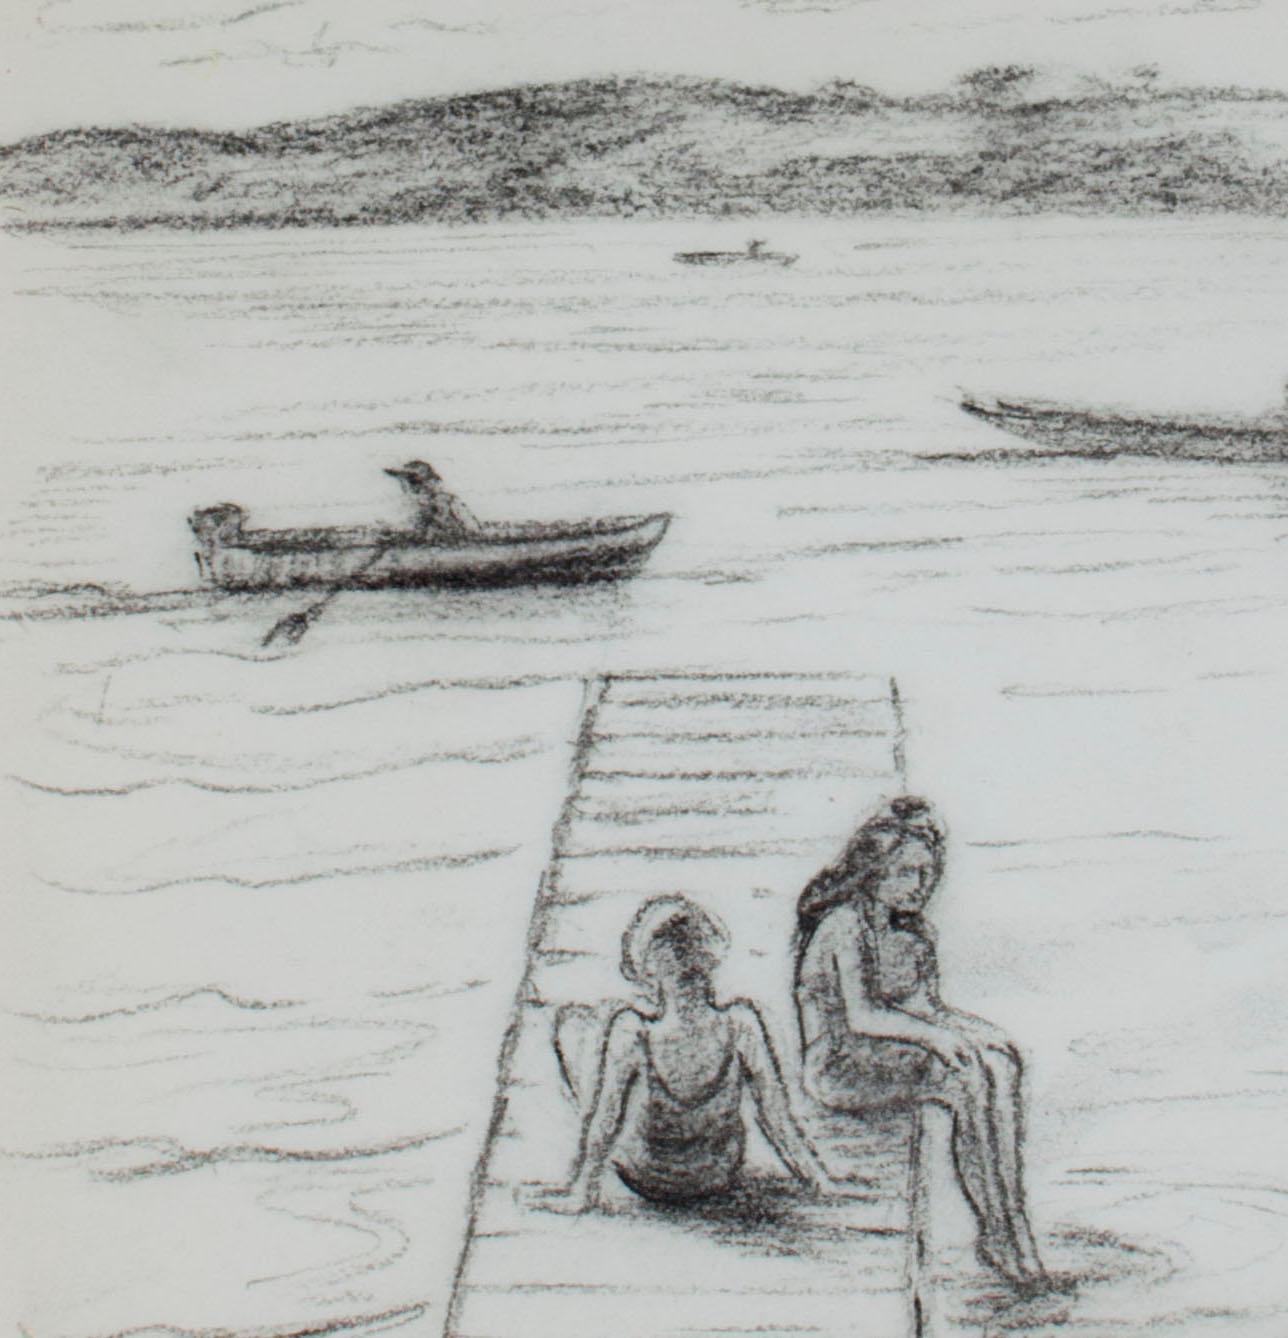 In this drawing, Sylvia Spicuzza presents the viewer with a scene of two young women relaxing on a dock in a lake. A dinghy floats beside them as other boats traverse the water. This drawing is reminiscent of the work done by her father Francesco,